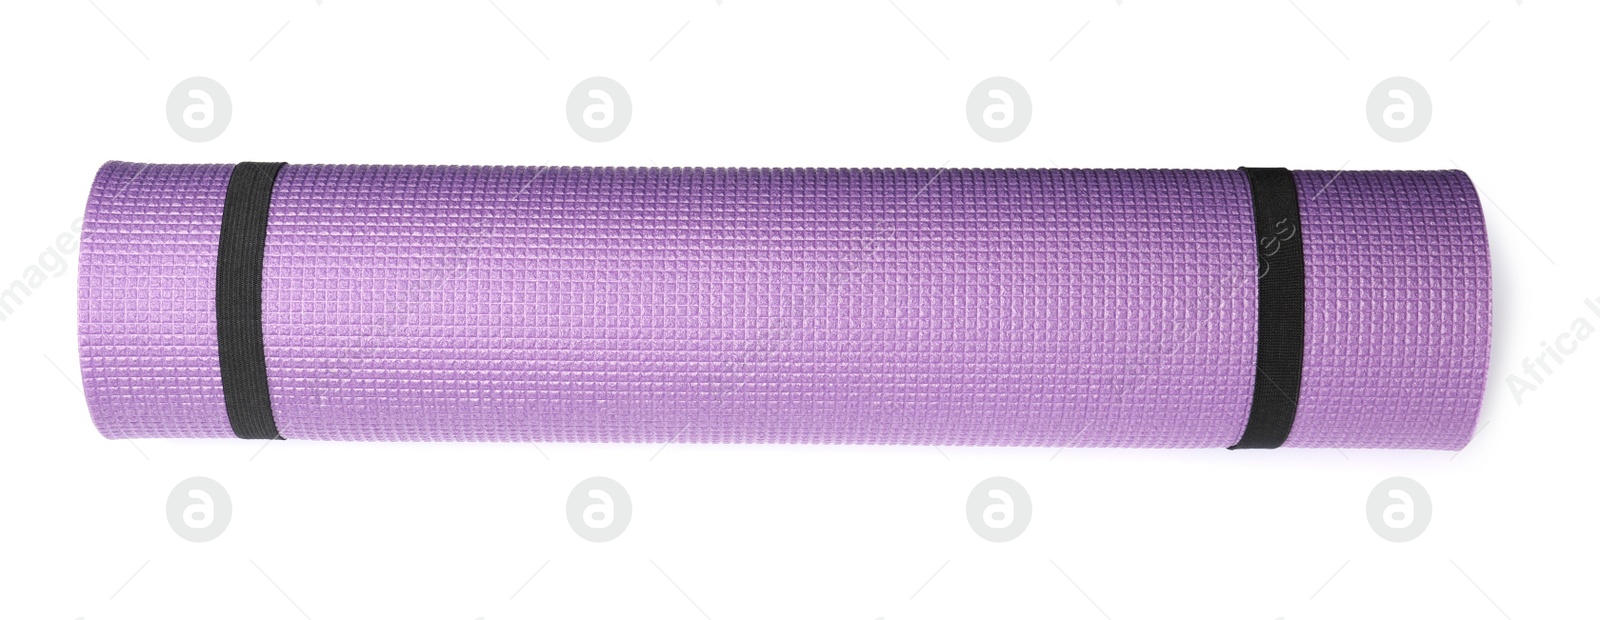 Photo of Violet rolled camping or exercise mat on white background, top view